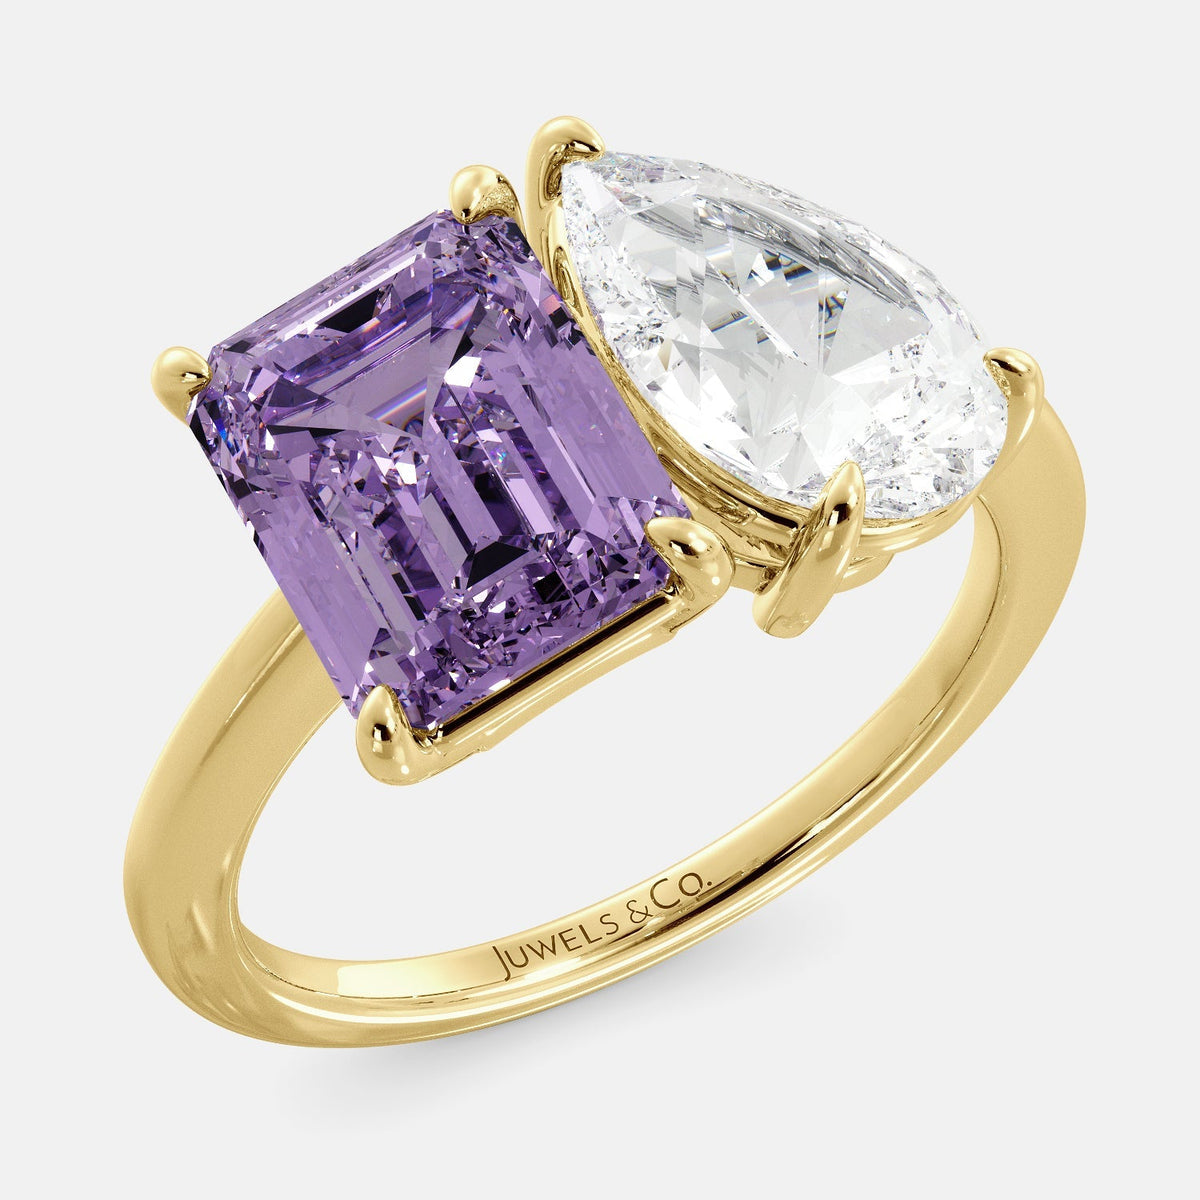 This image shows a toi et moi ring with a pear-shaped white topaz and an emerald-cut amethyst. The ring is set in a 14k yellow gold band and is available in all sizes. The amethyst is a purple gemstone that is said to promote peace, love, and harmony. The white topaz is a clear, colorless stone that is said to promote creativity, imagination, and self-expression. The toi et moi ring is a beautiful and unique way to show your love and commitment to someone special.